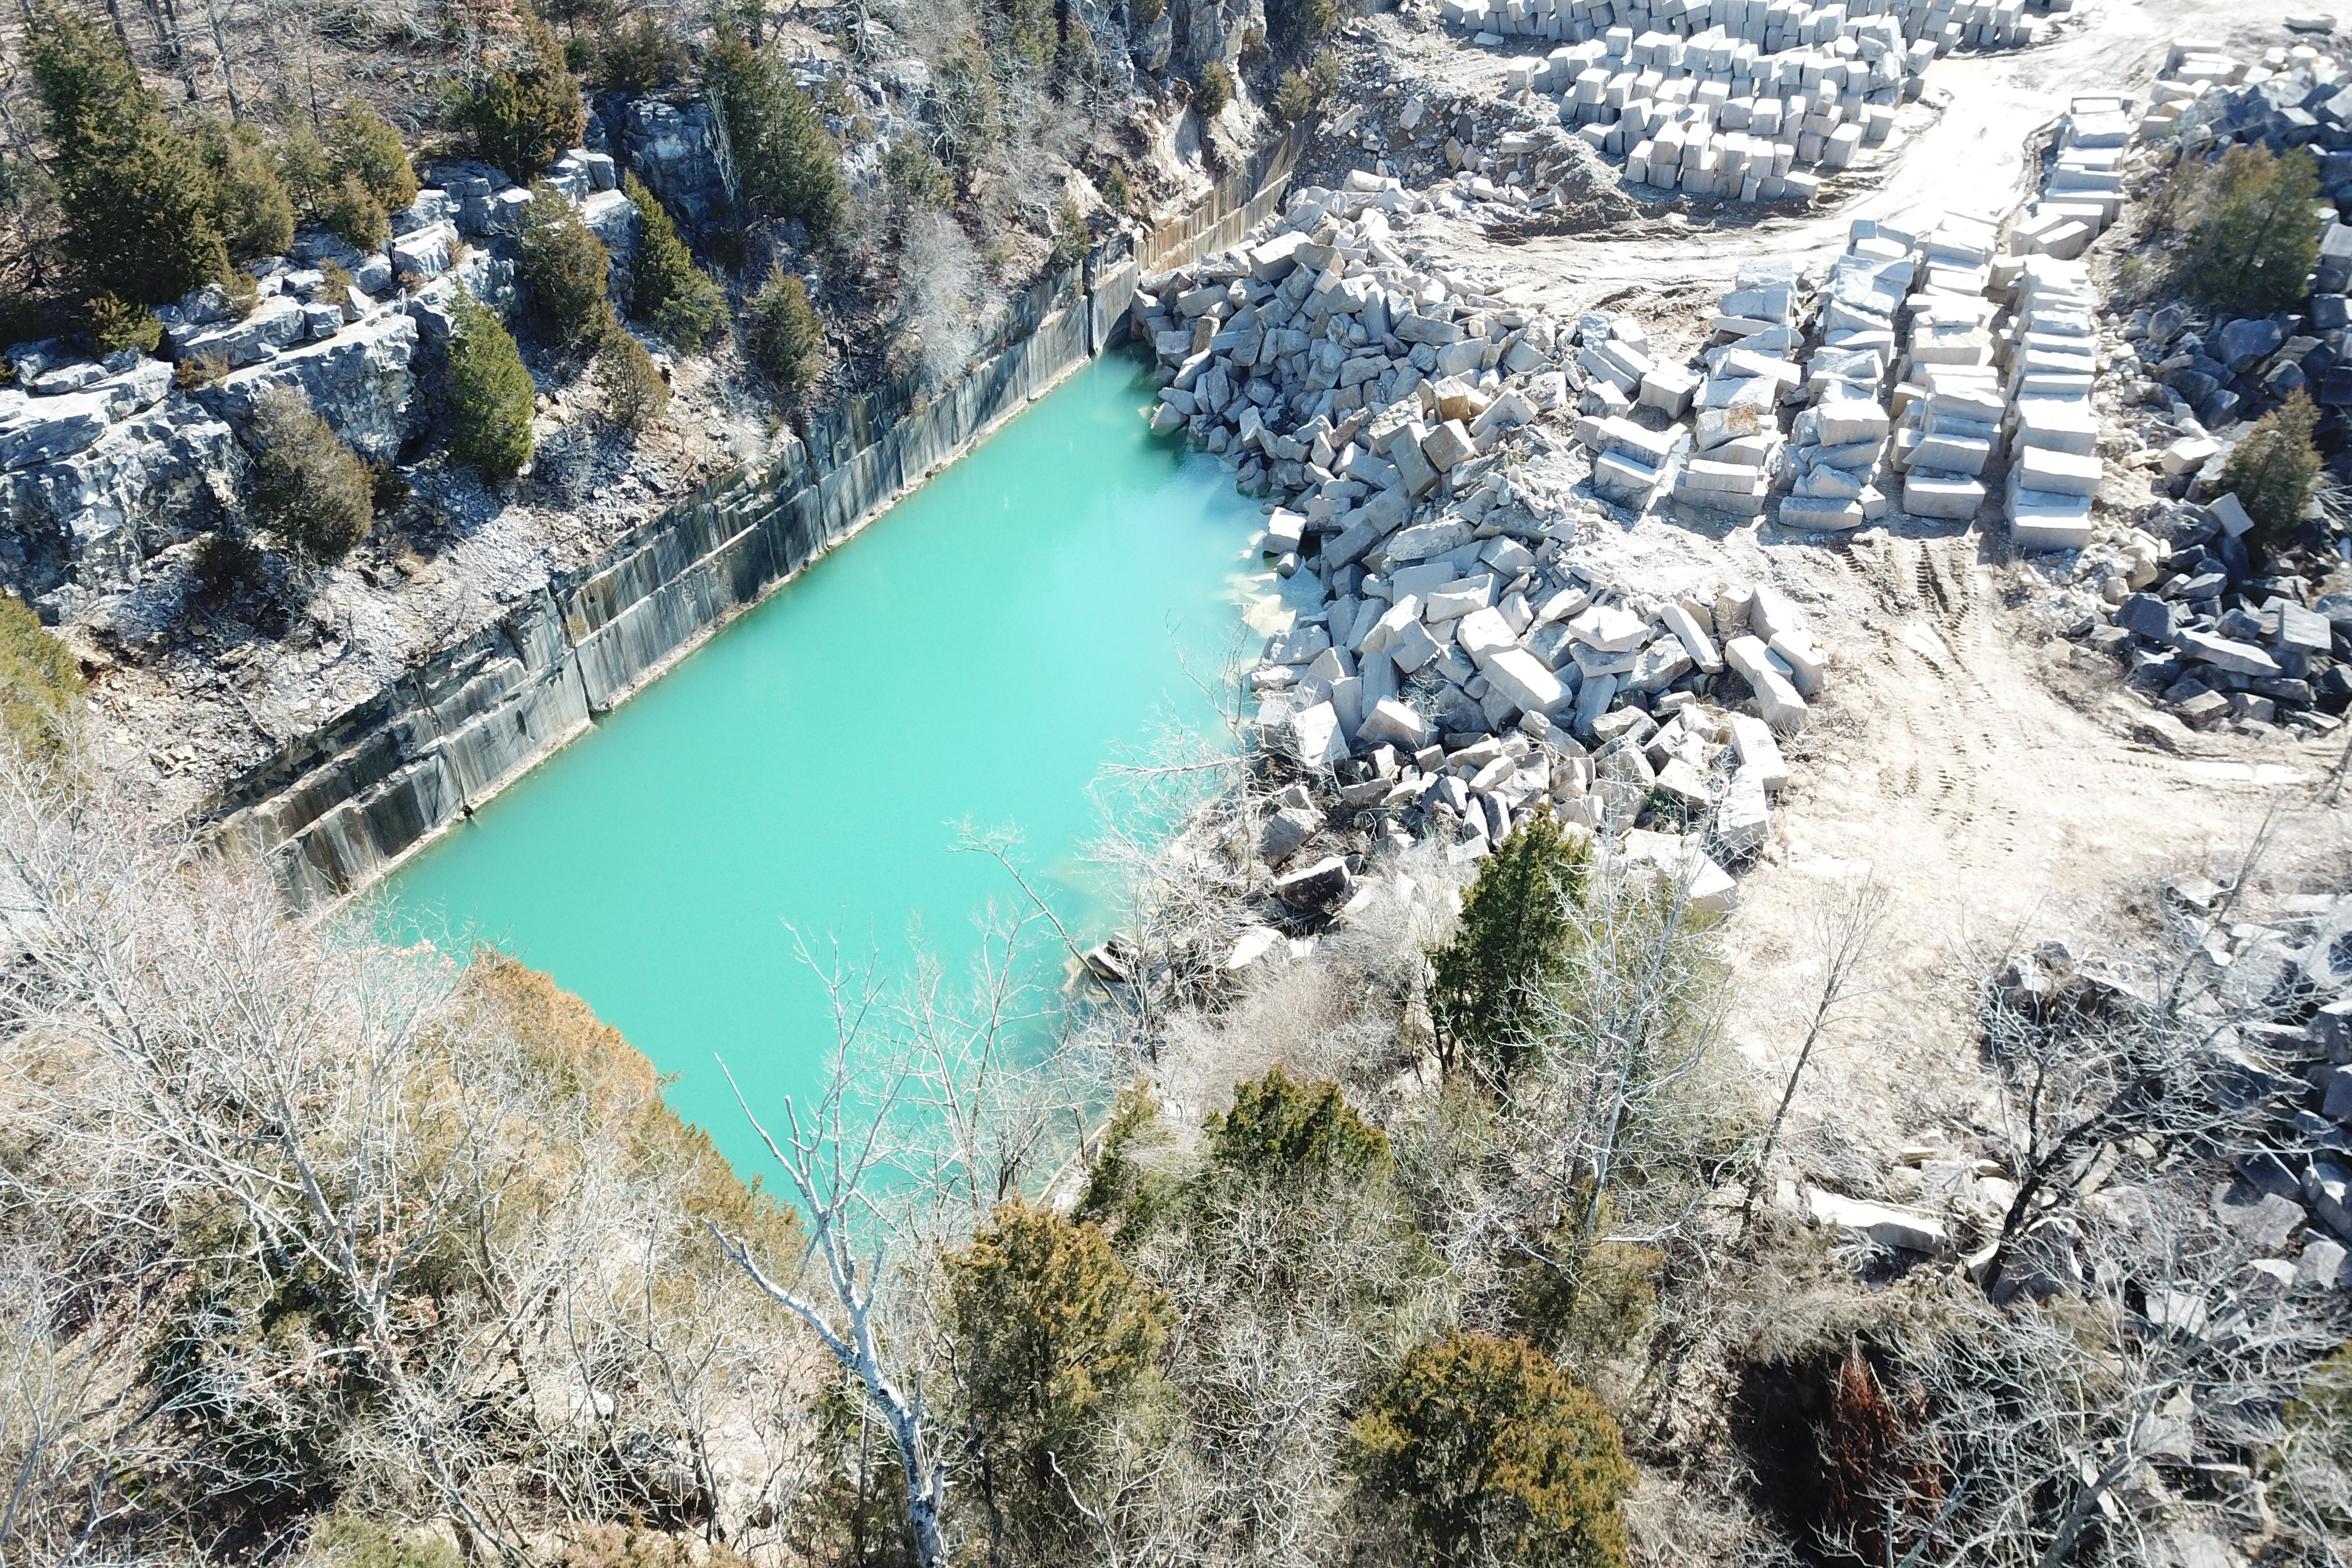 A photo of the Sanders Quarry in Bloomington (2020)